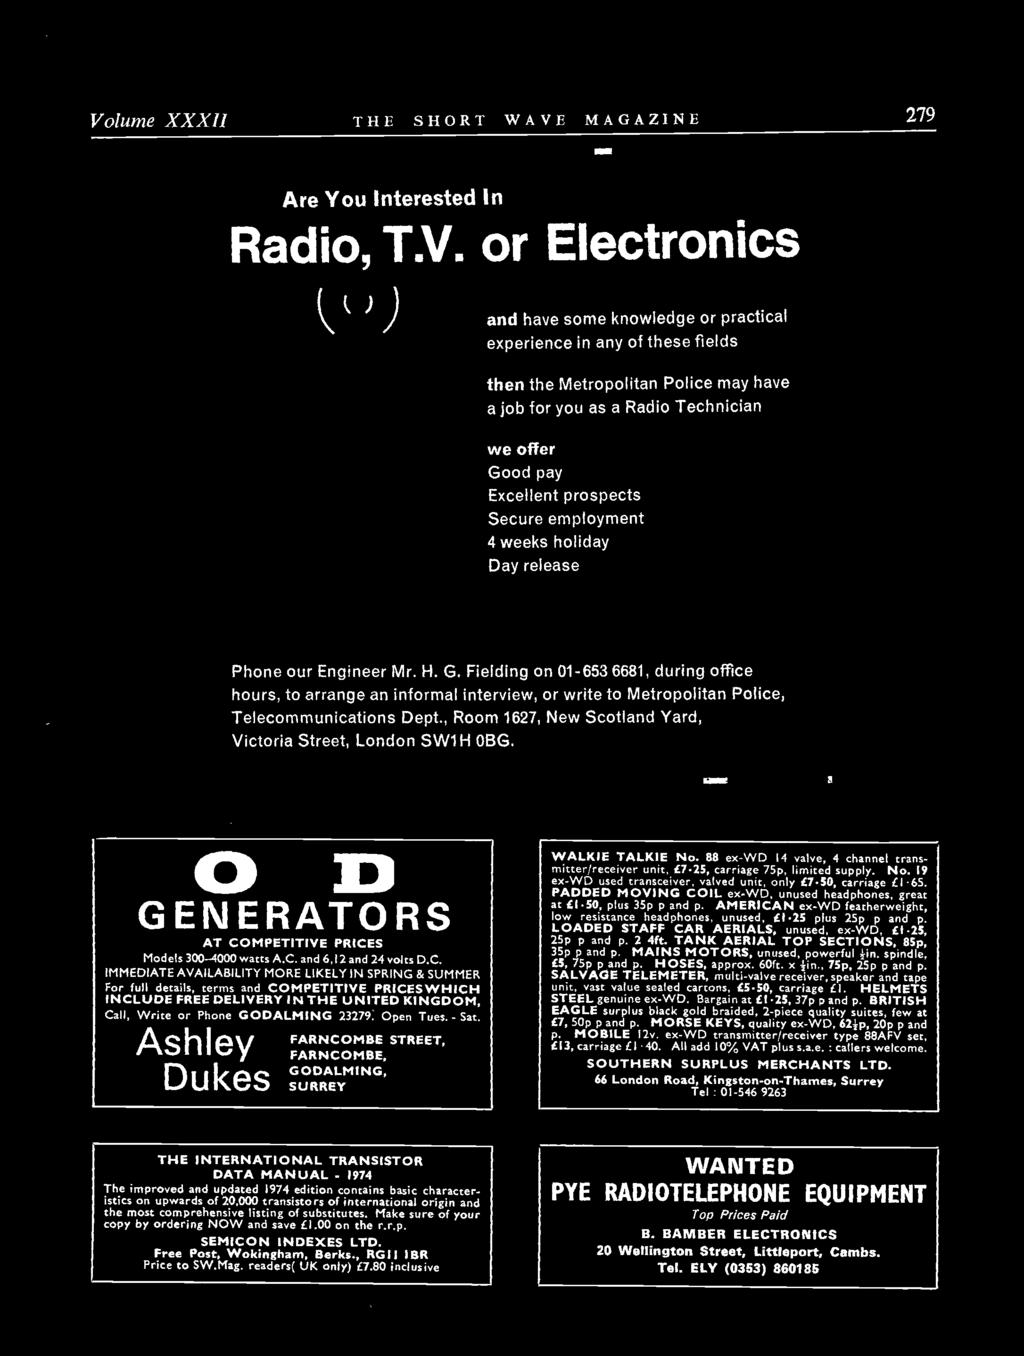 Volume XXXII THE SHORT WAVE MAGAZINE 279 Are You Interested In Radio, T.V. or Electronics and have some knowledge or practical experience in any of these fields then the Metropolitan Police may have